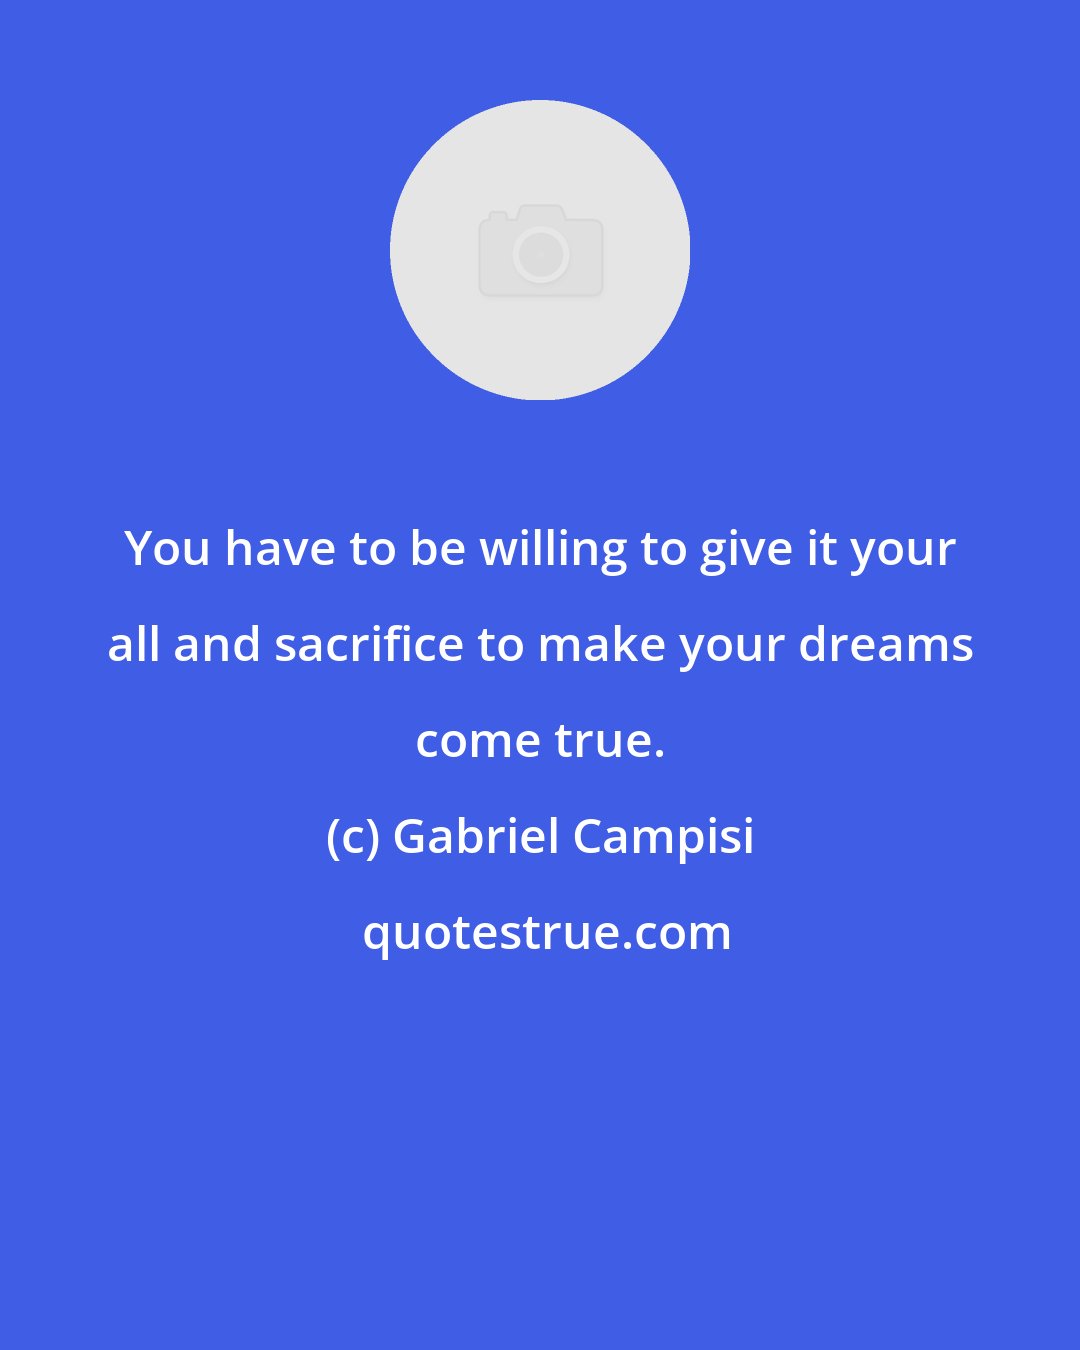 Gabriel Campisi: You have to be willing to give it your all and sacrifice to make your dreams come true.